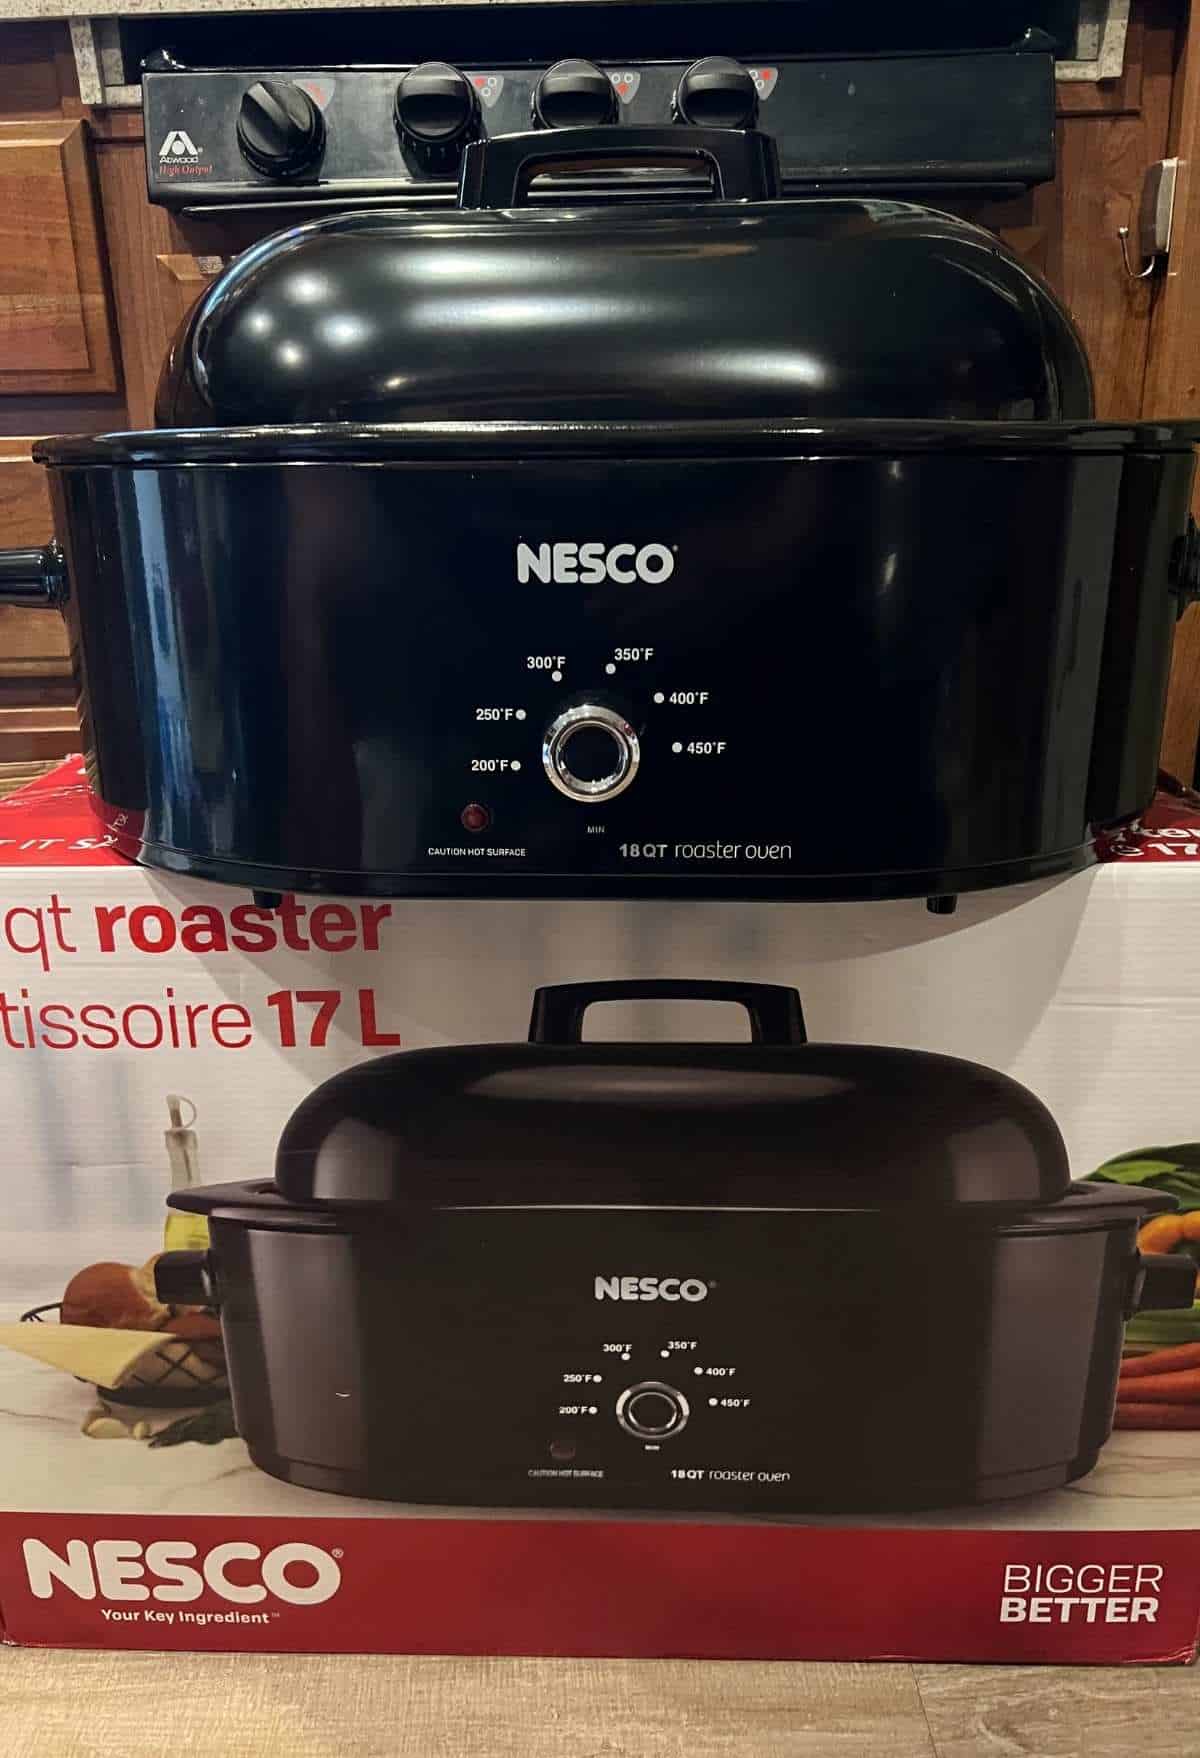 NESCO - Today is the last day of our giveaway! Don't